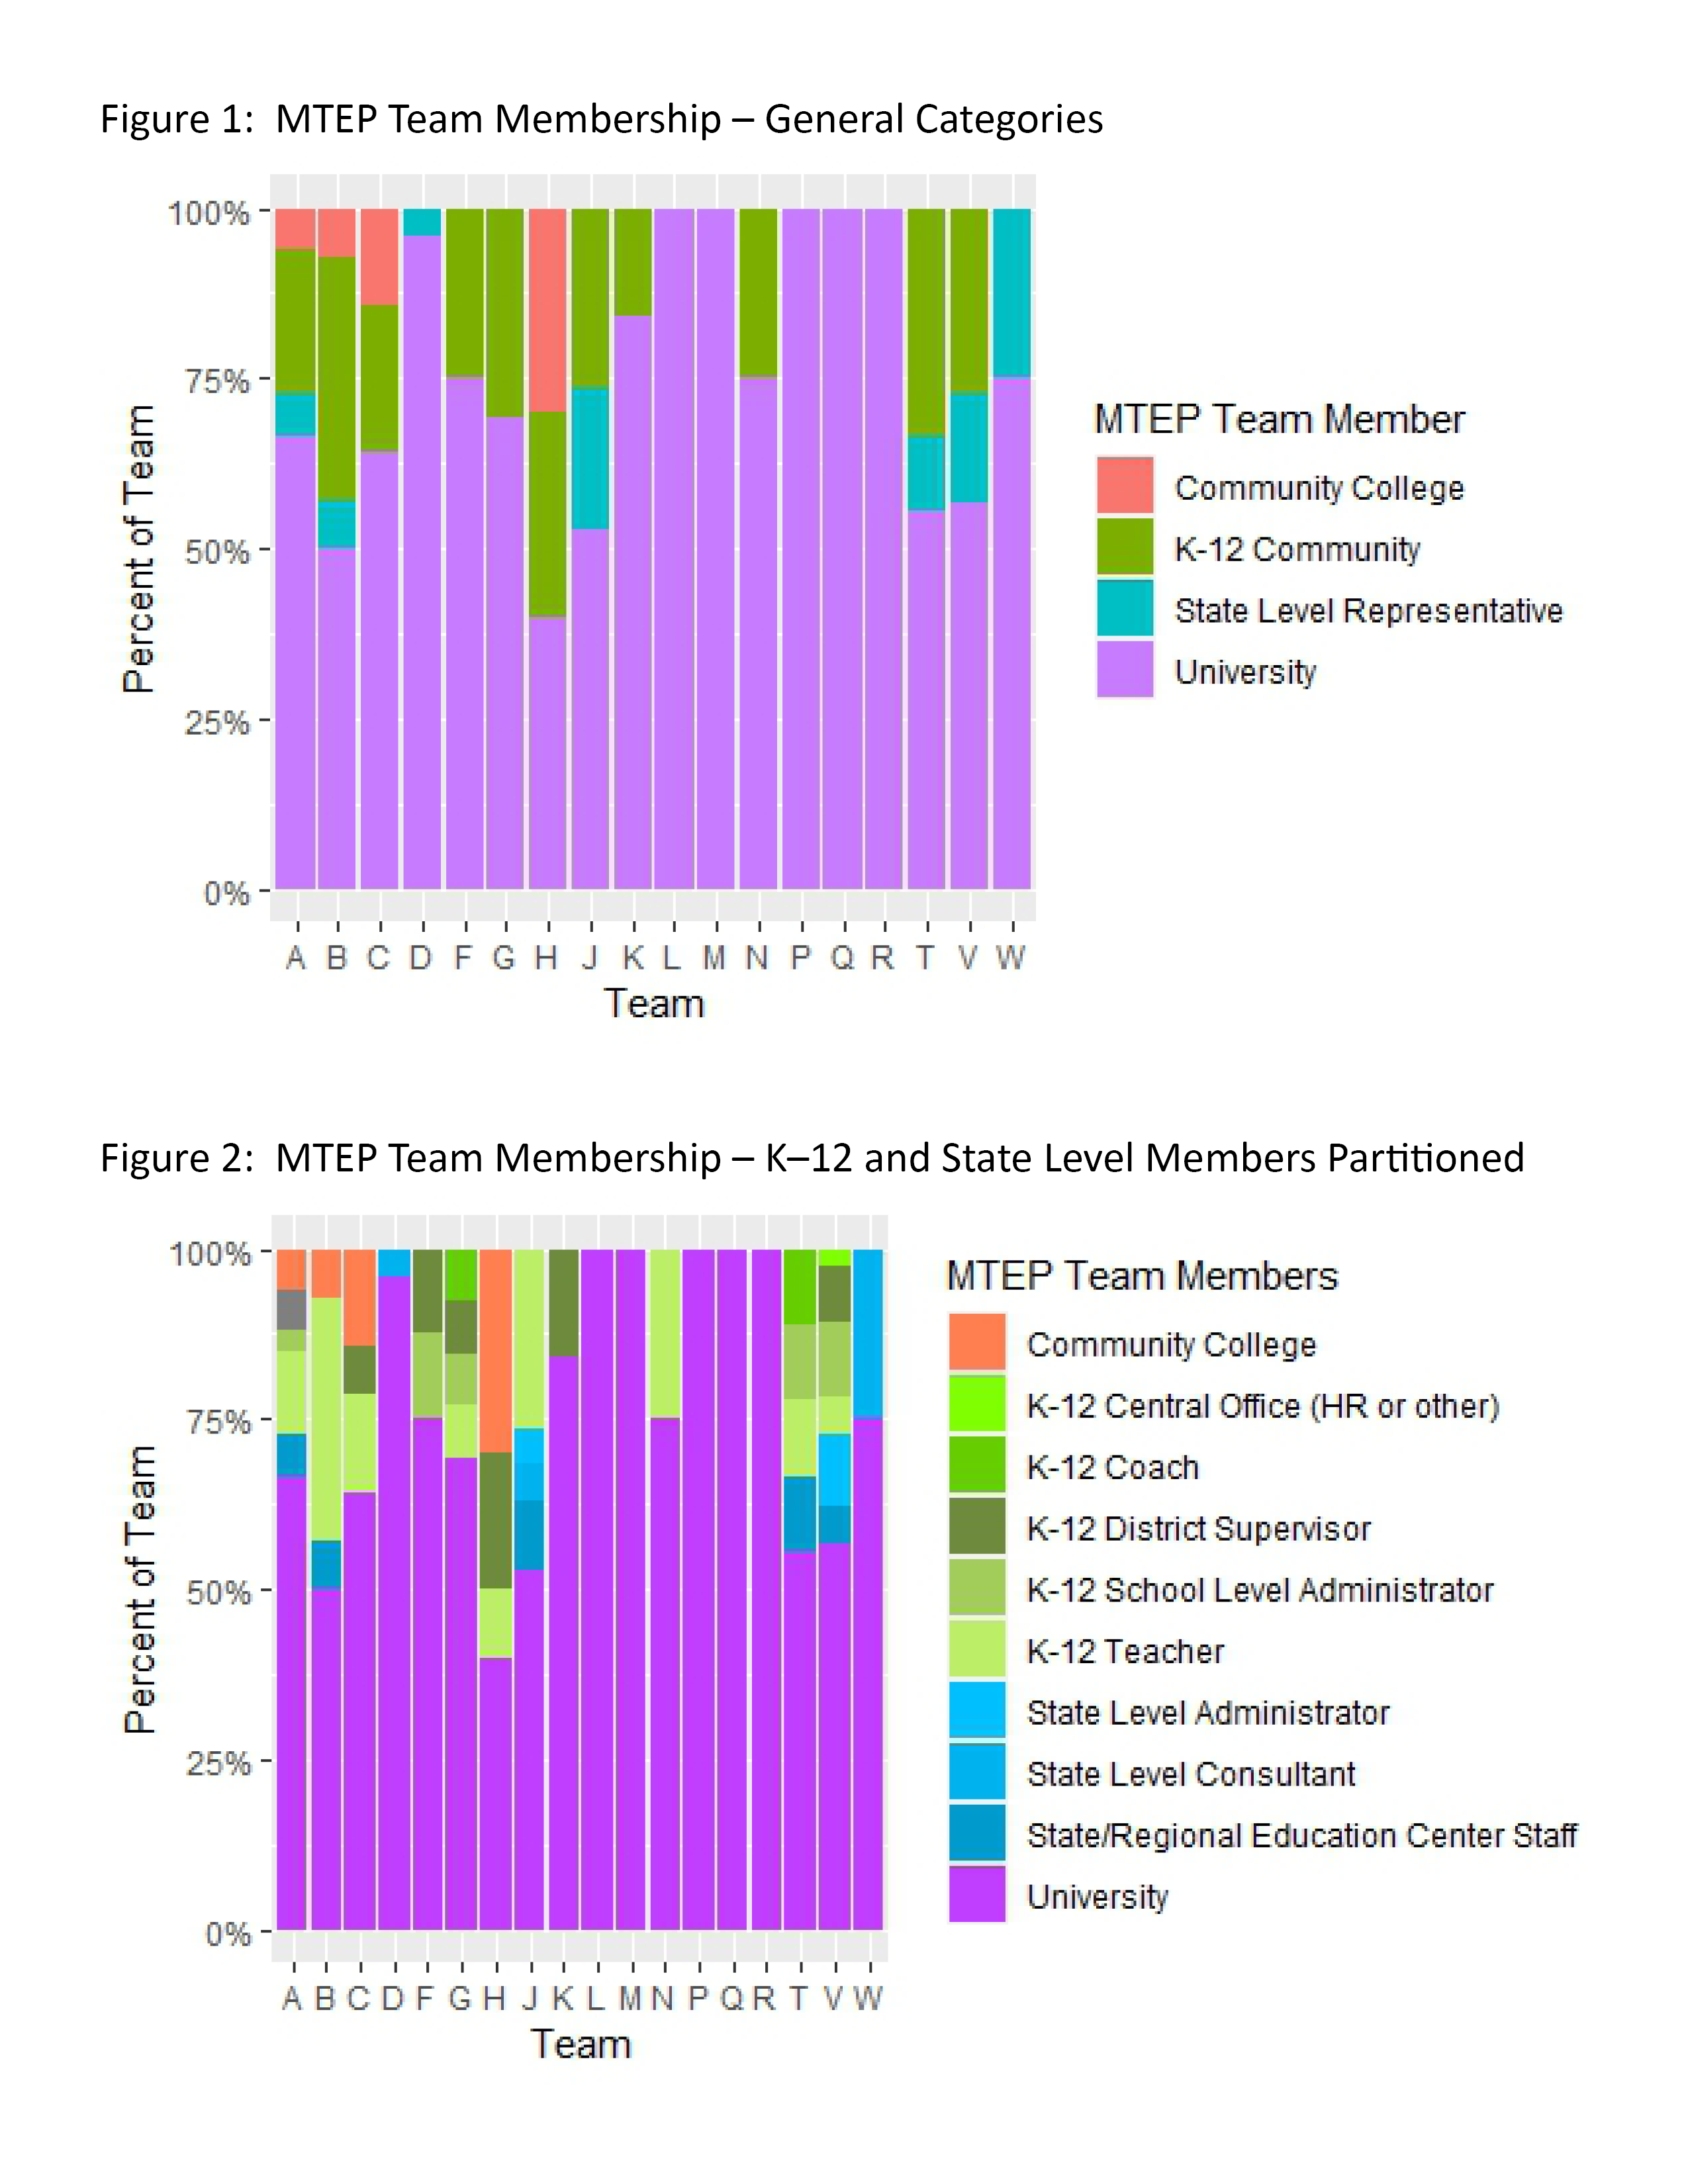 MTEP team members comprise four general categories: university, K–12, state department, and community college personnel. Figure 2 shows the breakdown of the roles of K-12 personnel who are members of MTEP teams.